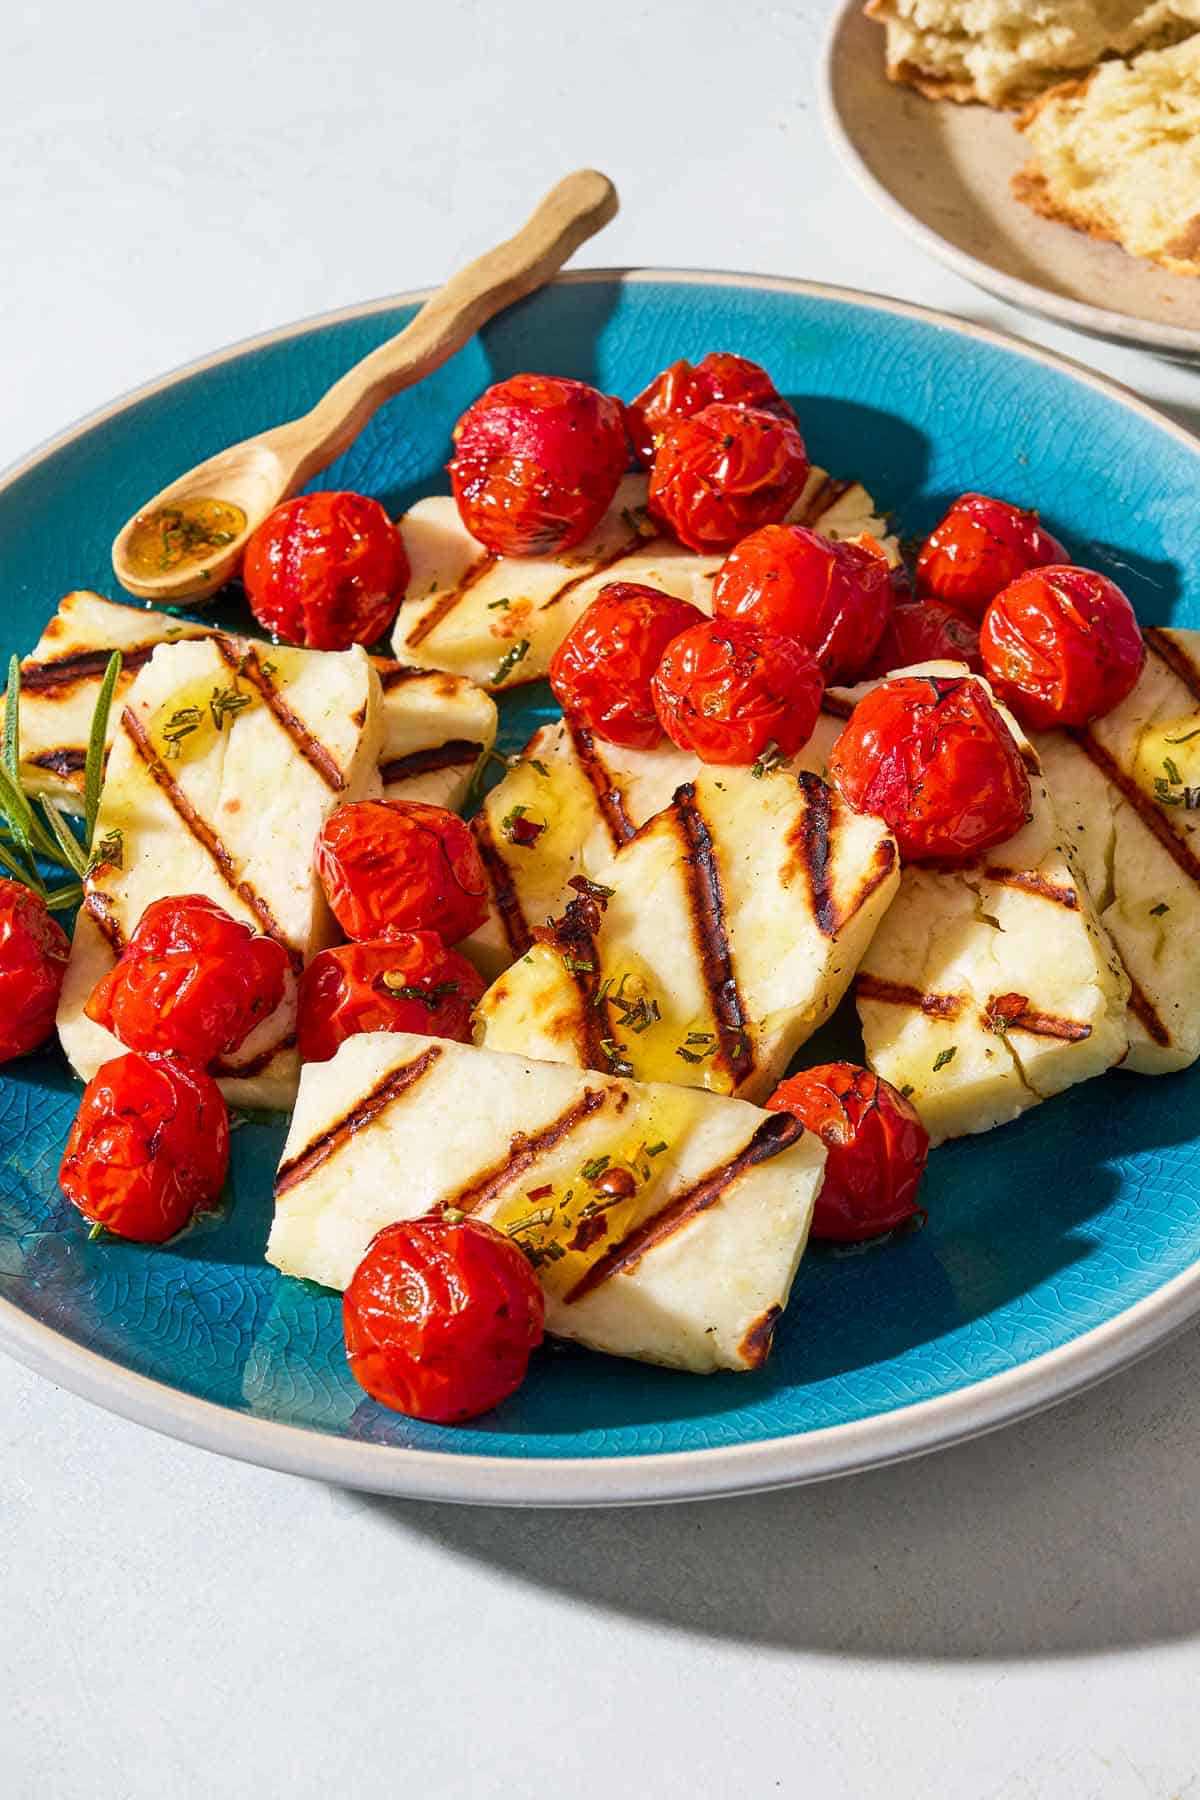 Grilled halloumi with blistered cherry tomatoes, sprigs of rosemary and a small spoon on a serving platter next to a plate with crusty bread.